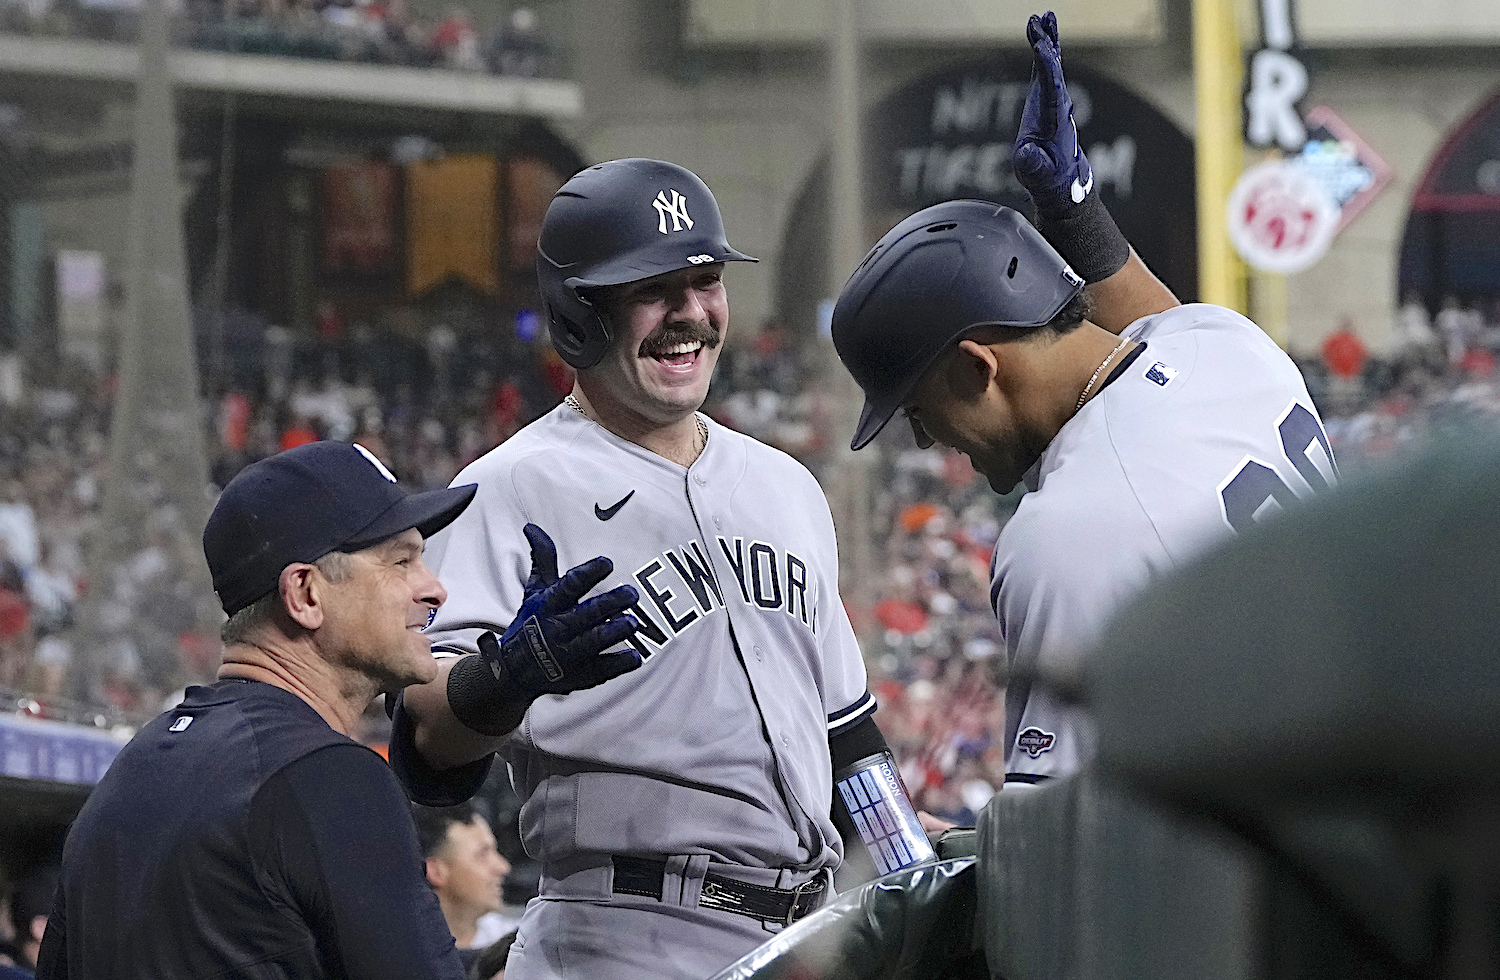 New York Yankees news: All the nicknames for the weekend revealed